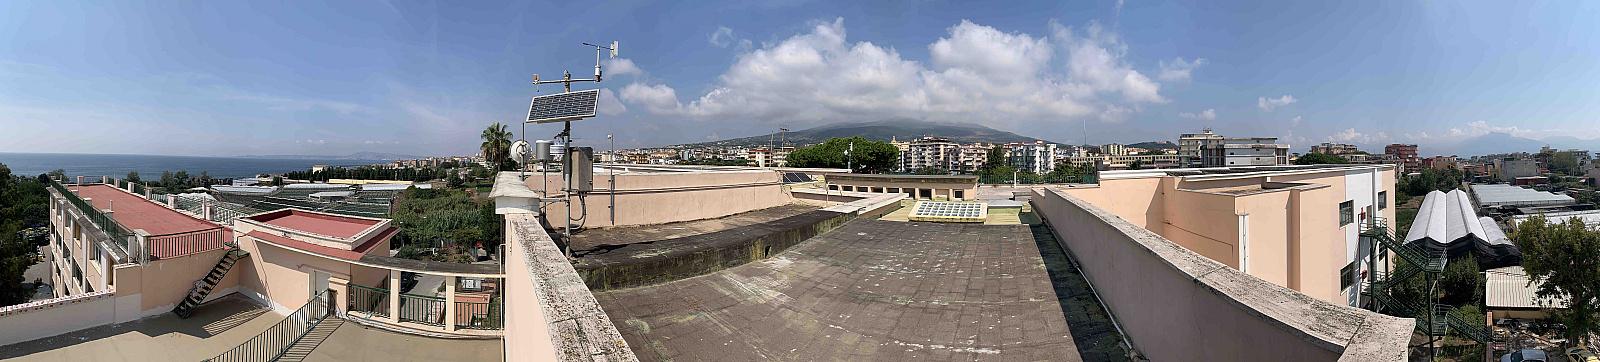 Landscape from the roof of the town hall of Torre del Greco (Naples), where a station of the meteorological TROPOMAG network is installed. In the background, the silhouette of Mt. Vesuvius - Pictures